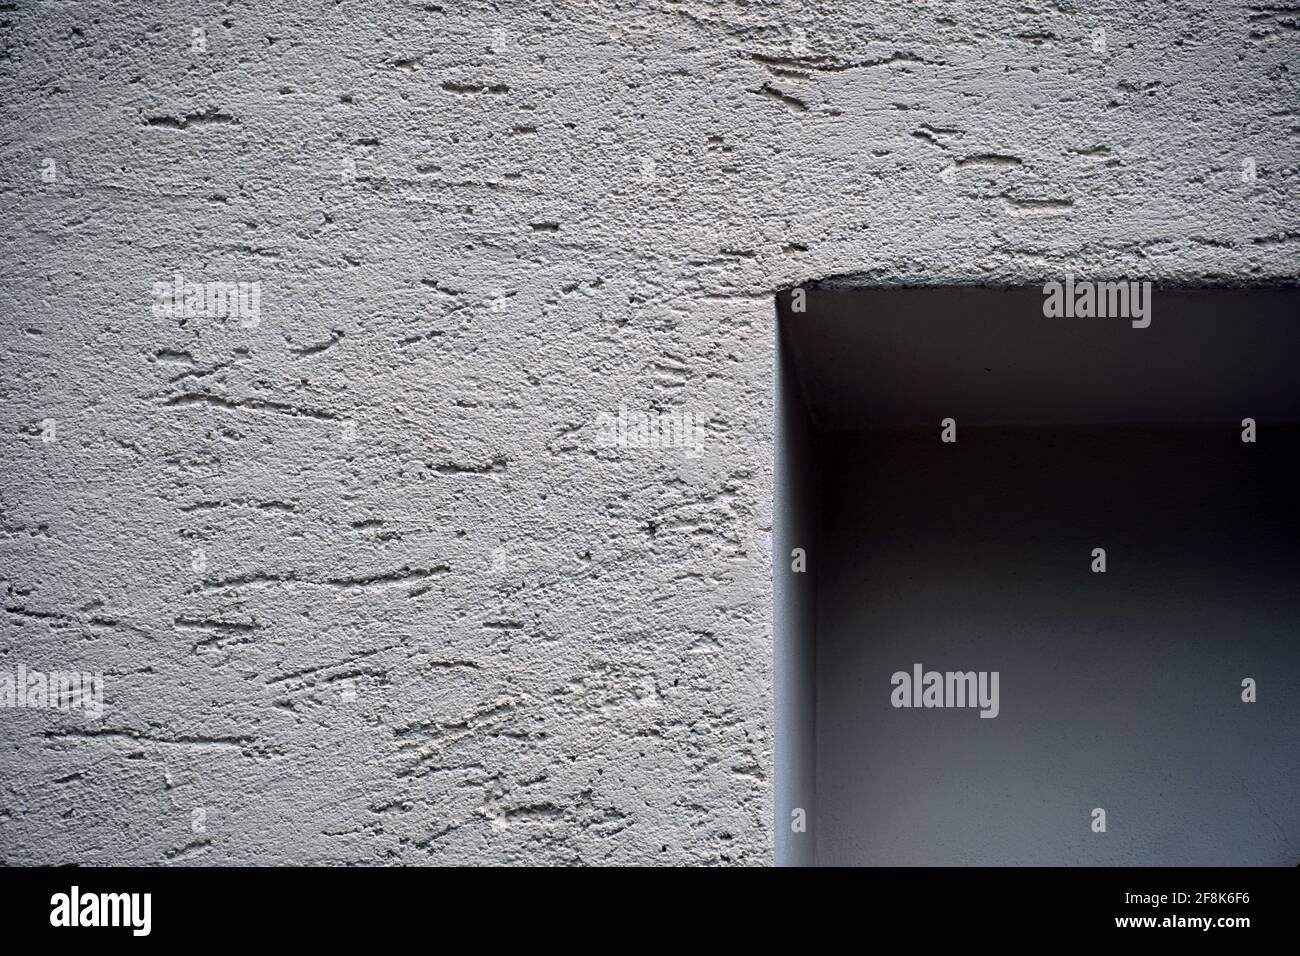 Concrete wall, lines and shapes in an architectural simple concept photograph, close-up, hand held, colour photography with a copy space. Stock Photo